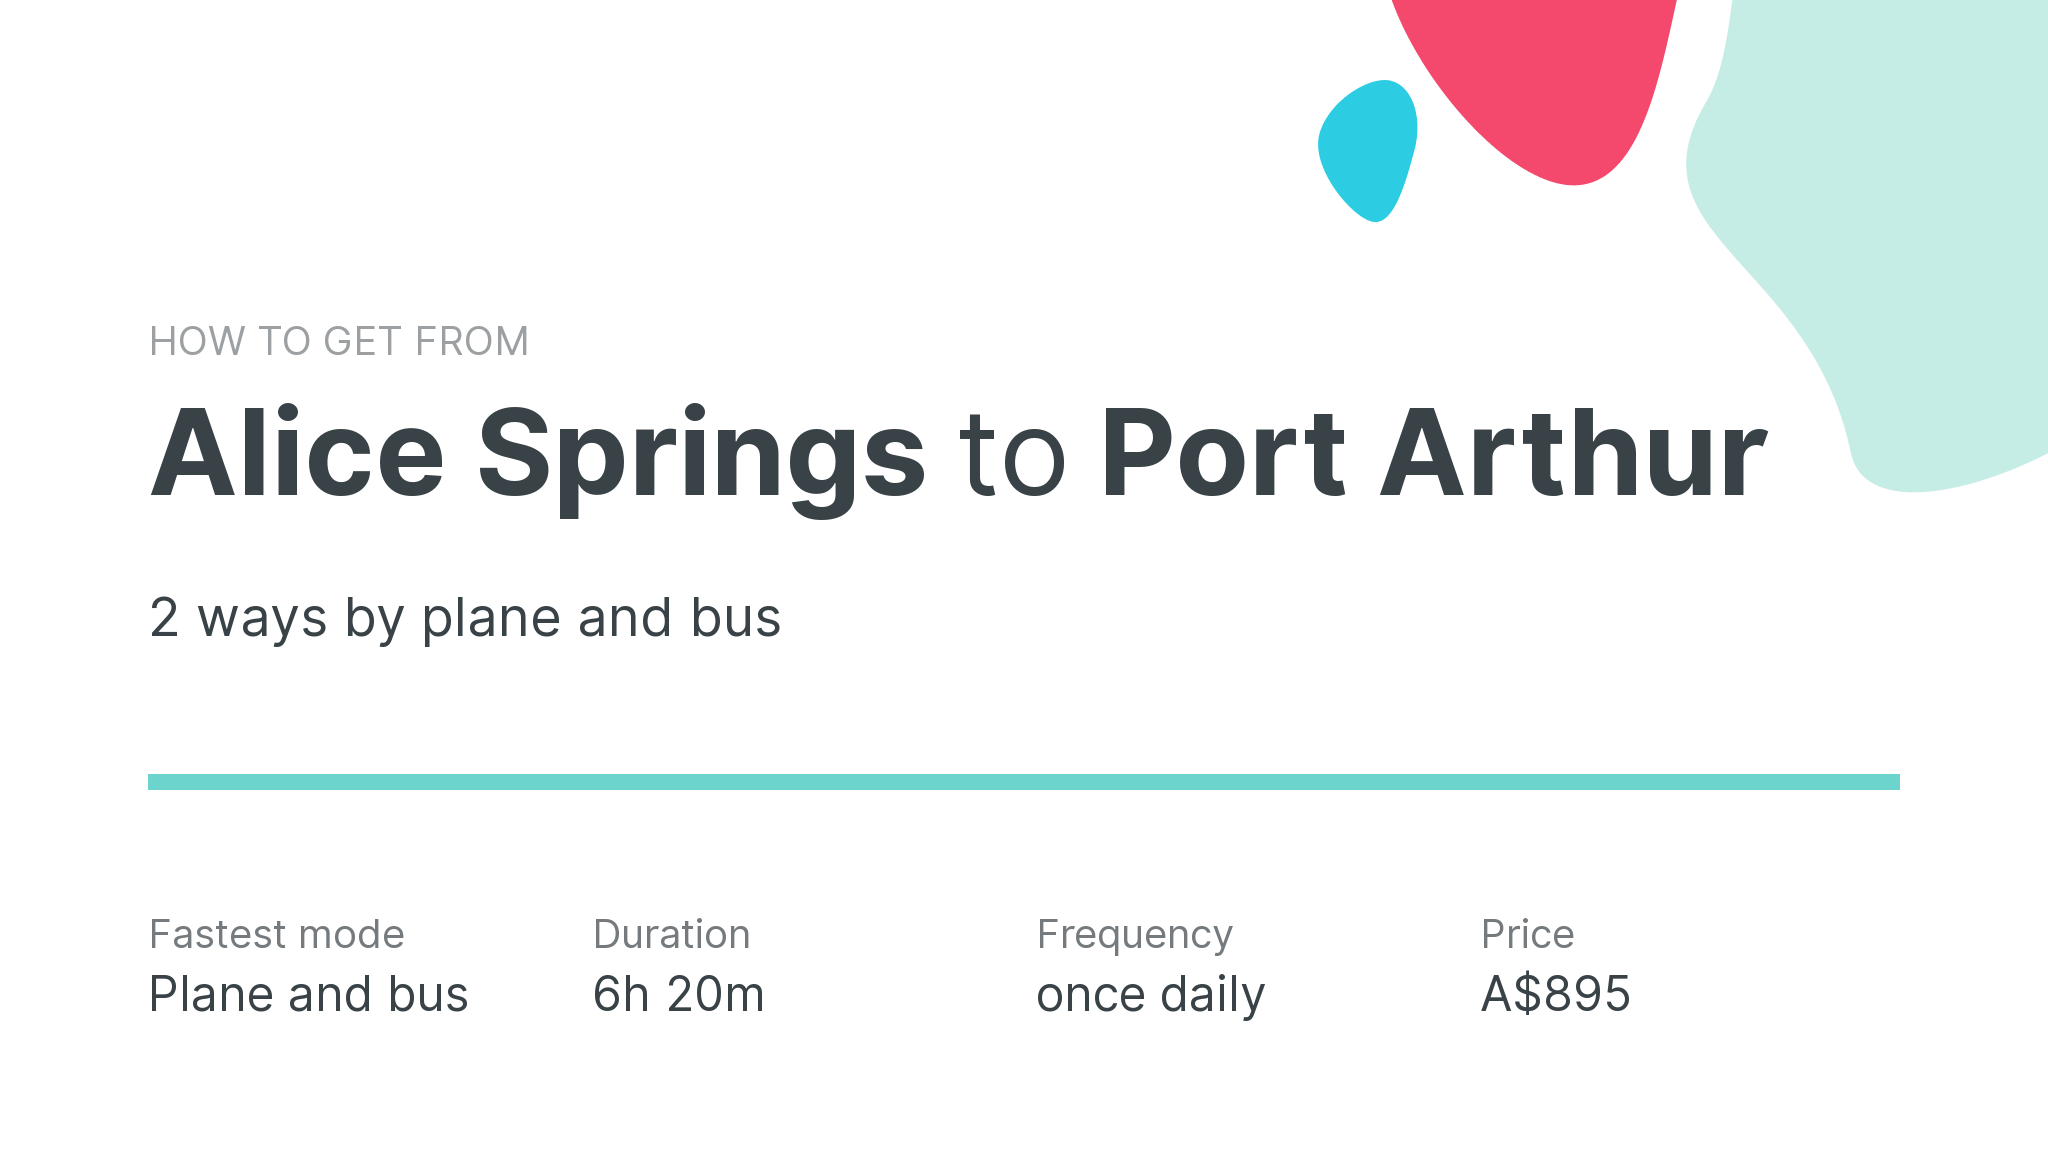 How do I get from Alice Springs to Port Arthur